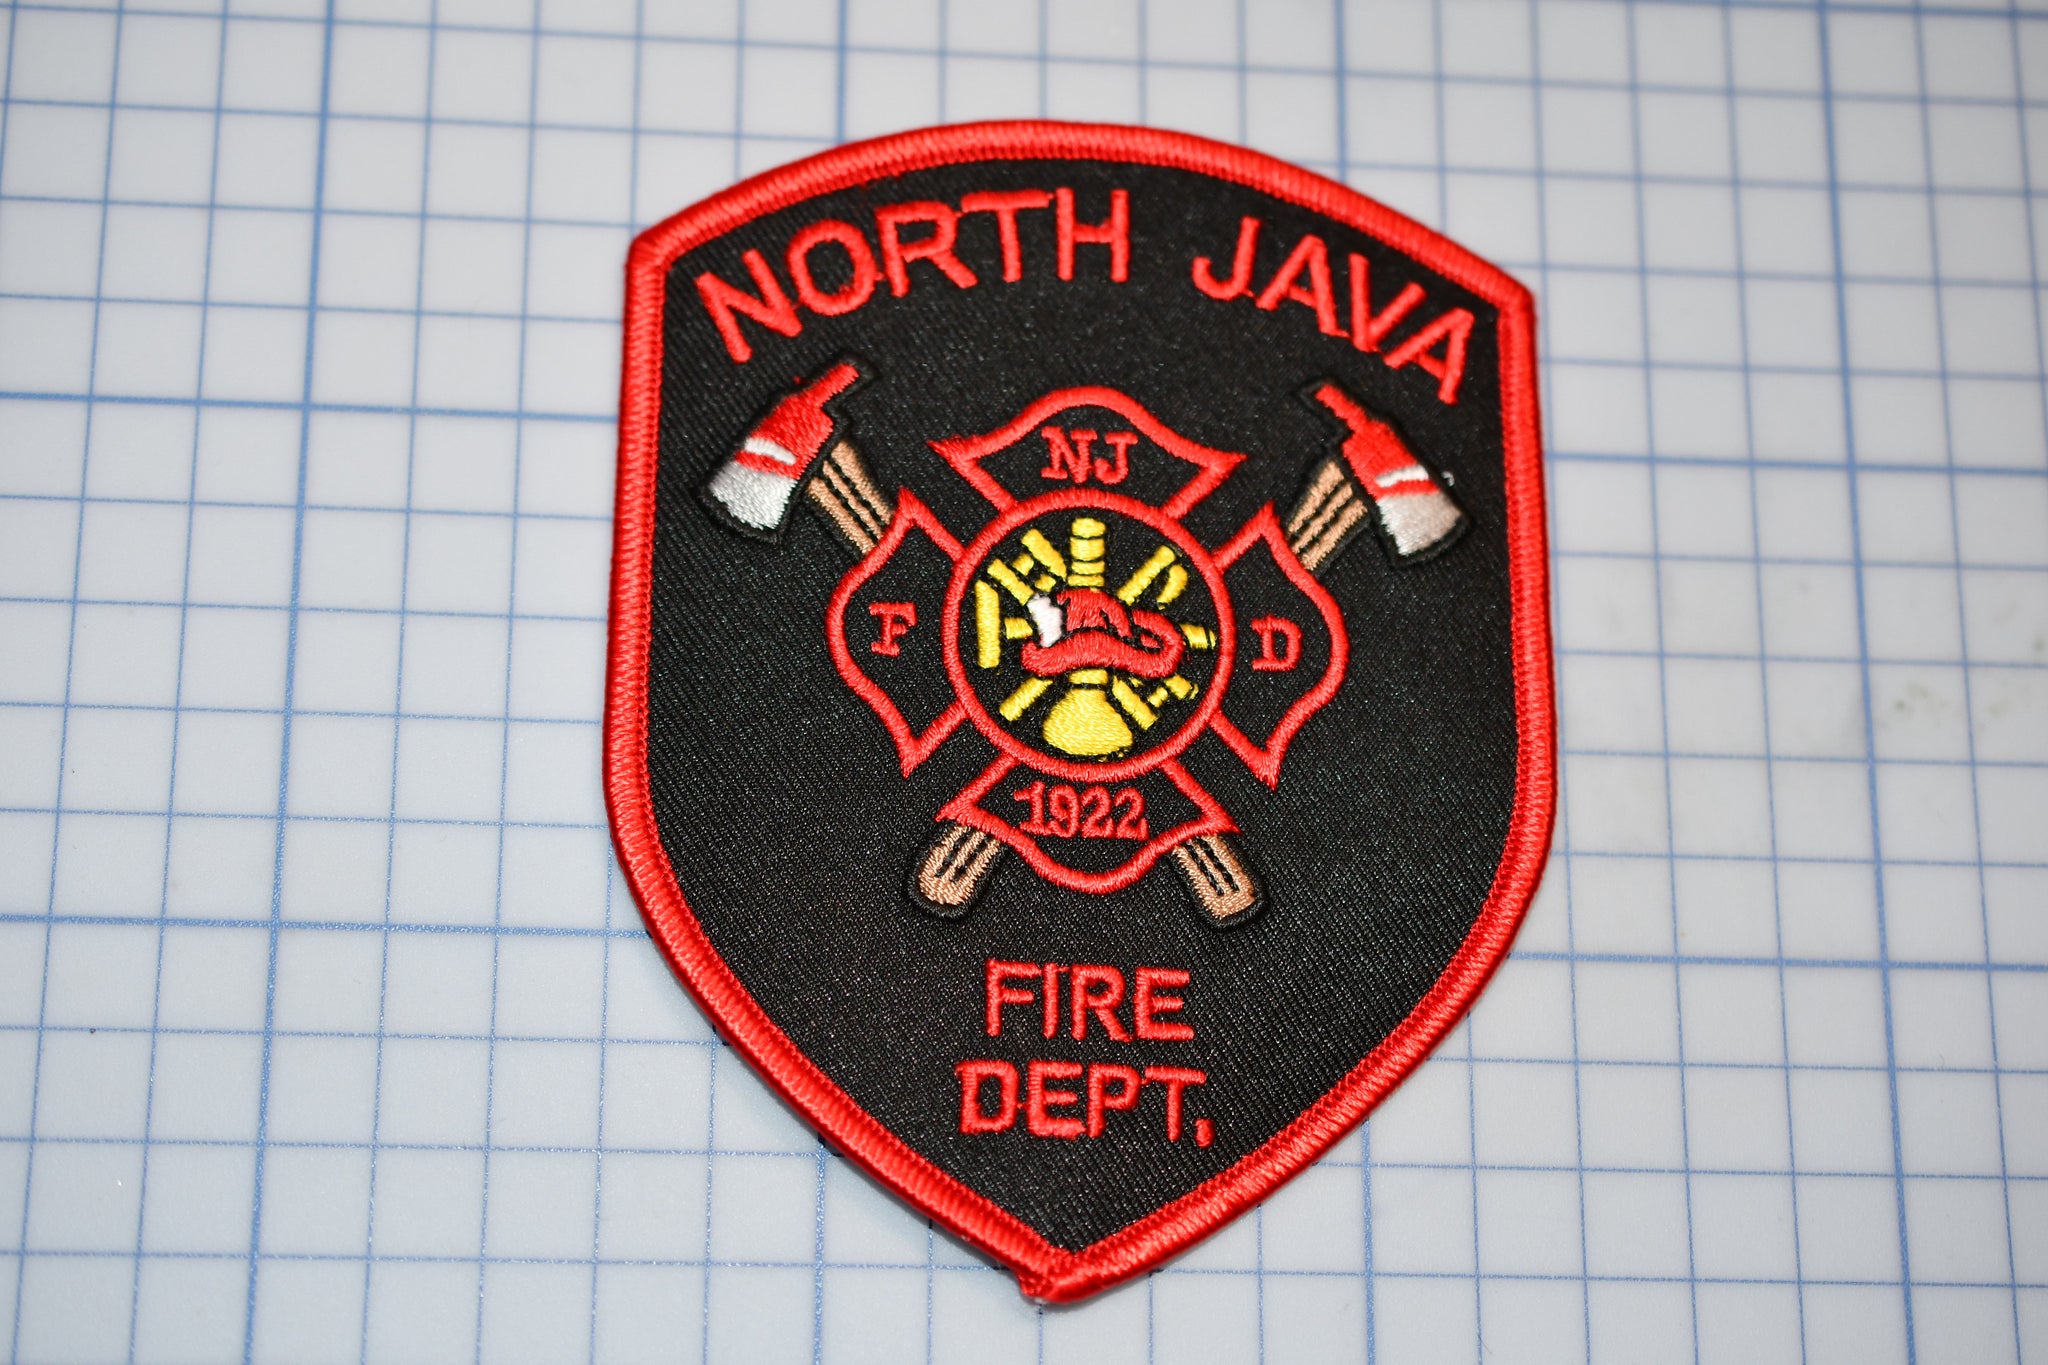 North Java New Jersey Fire Department Patch (B29-359)